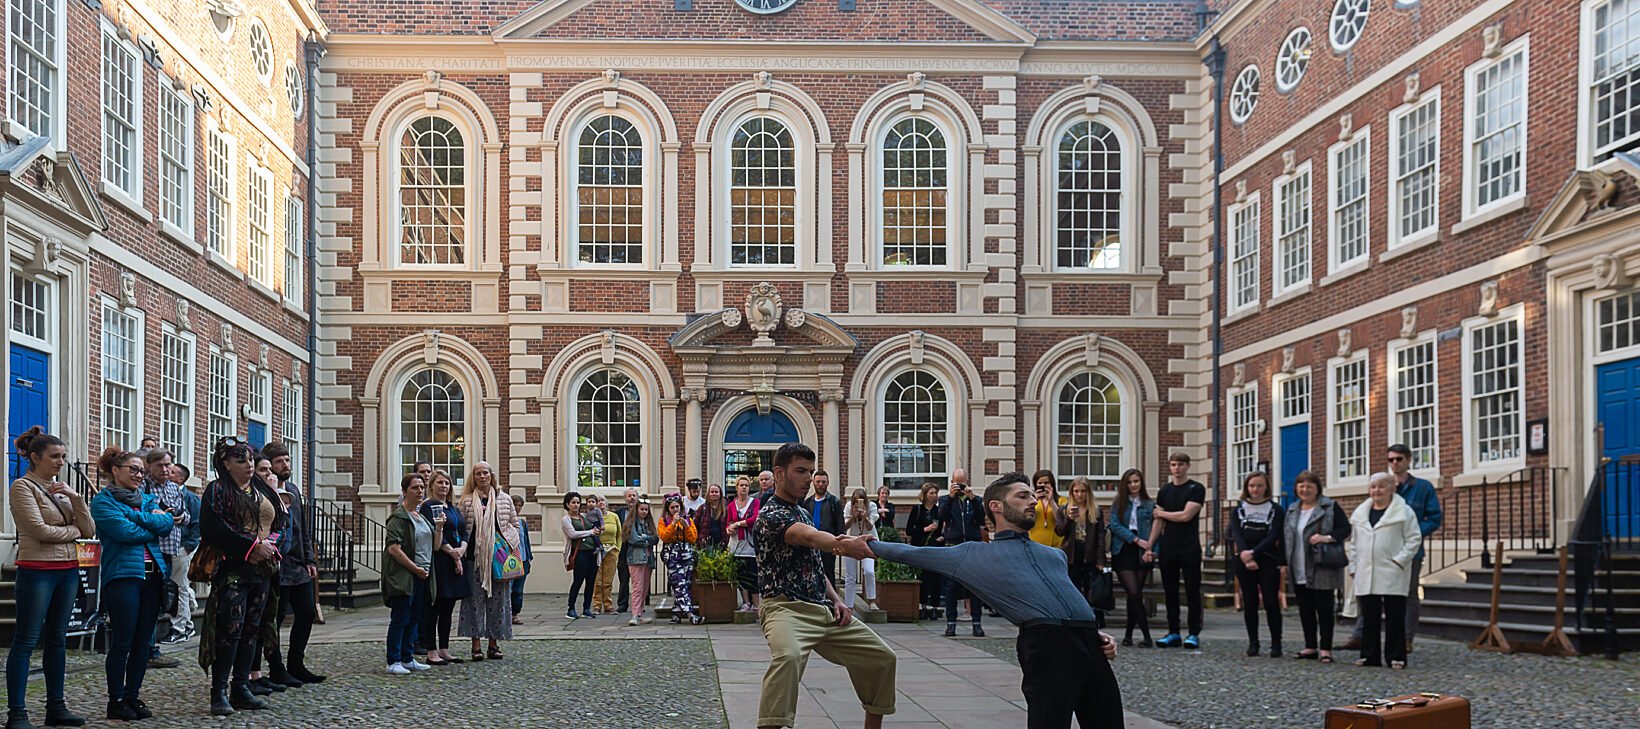 Two dancers perform in Bluecoat's courtyard with a packed audience behind them. In the background you can see the Bluecoat building.